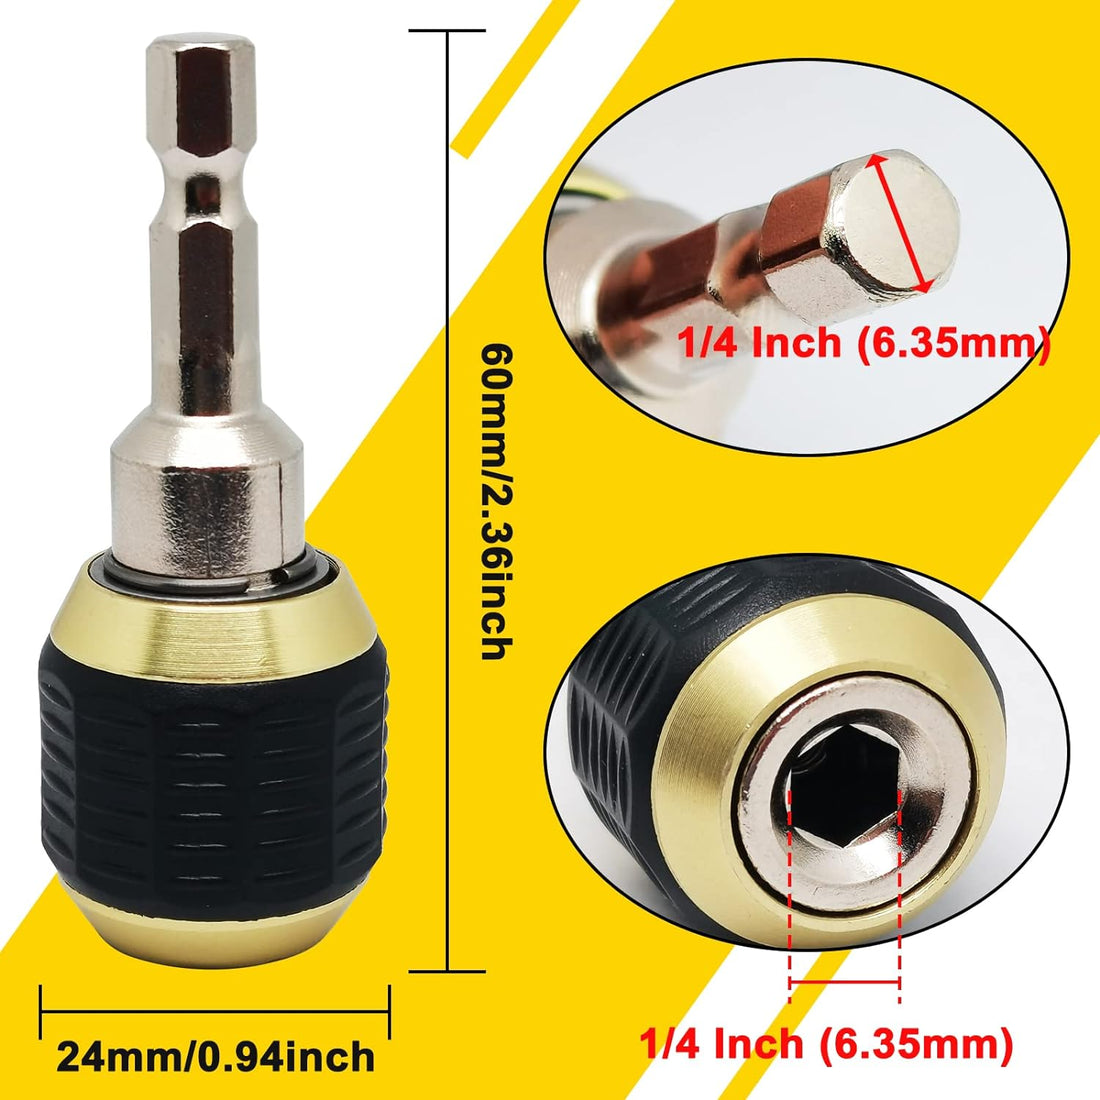 1pcs 1/4 Inch Hex Shank Drill Bit Extension Screwdriver Bit Holder,Hex Shank Extension Connection Rod Adapter Works with All 1/4-Inch Drive Bits,60mm Length,Non-Magnetic